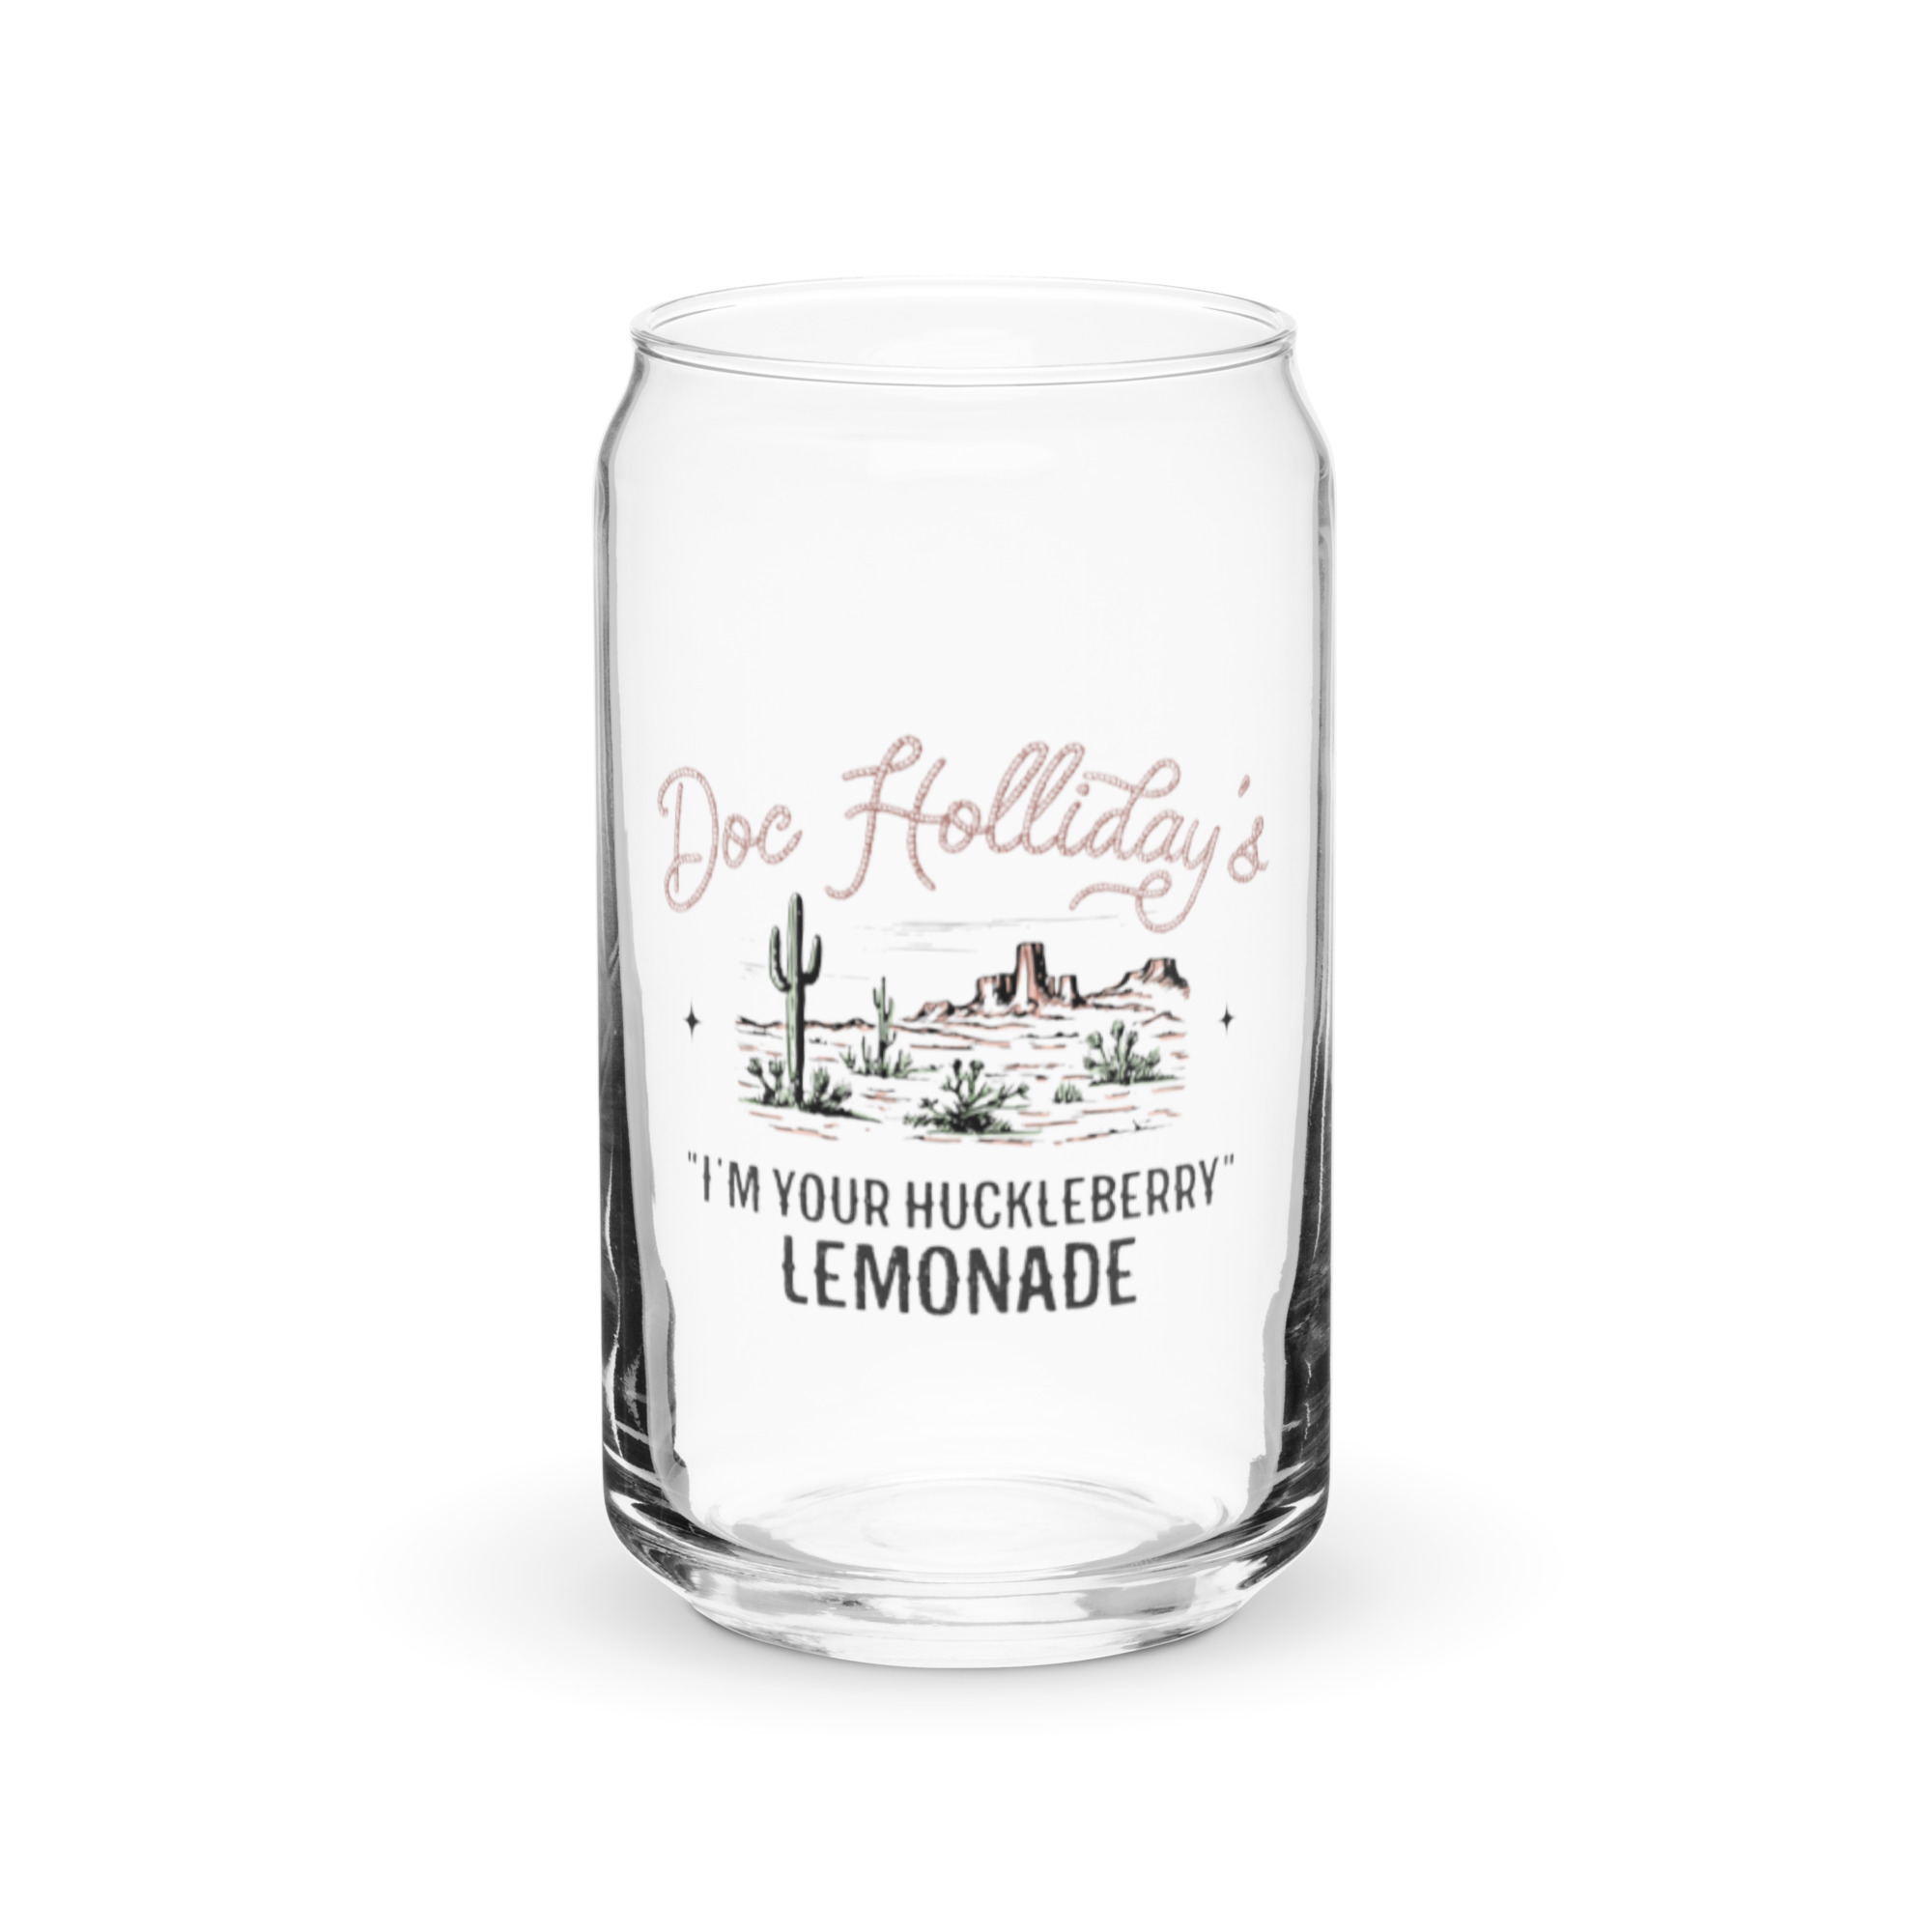 A glass with the words "do holly's" - the perfect gift for foodies who love refreshing lemonade.